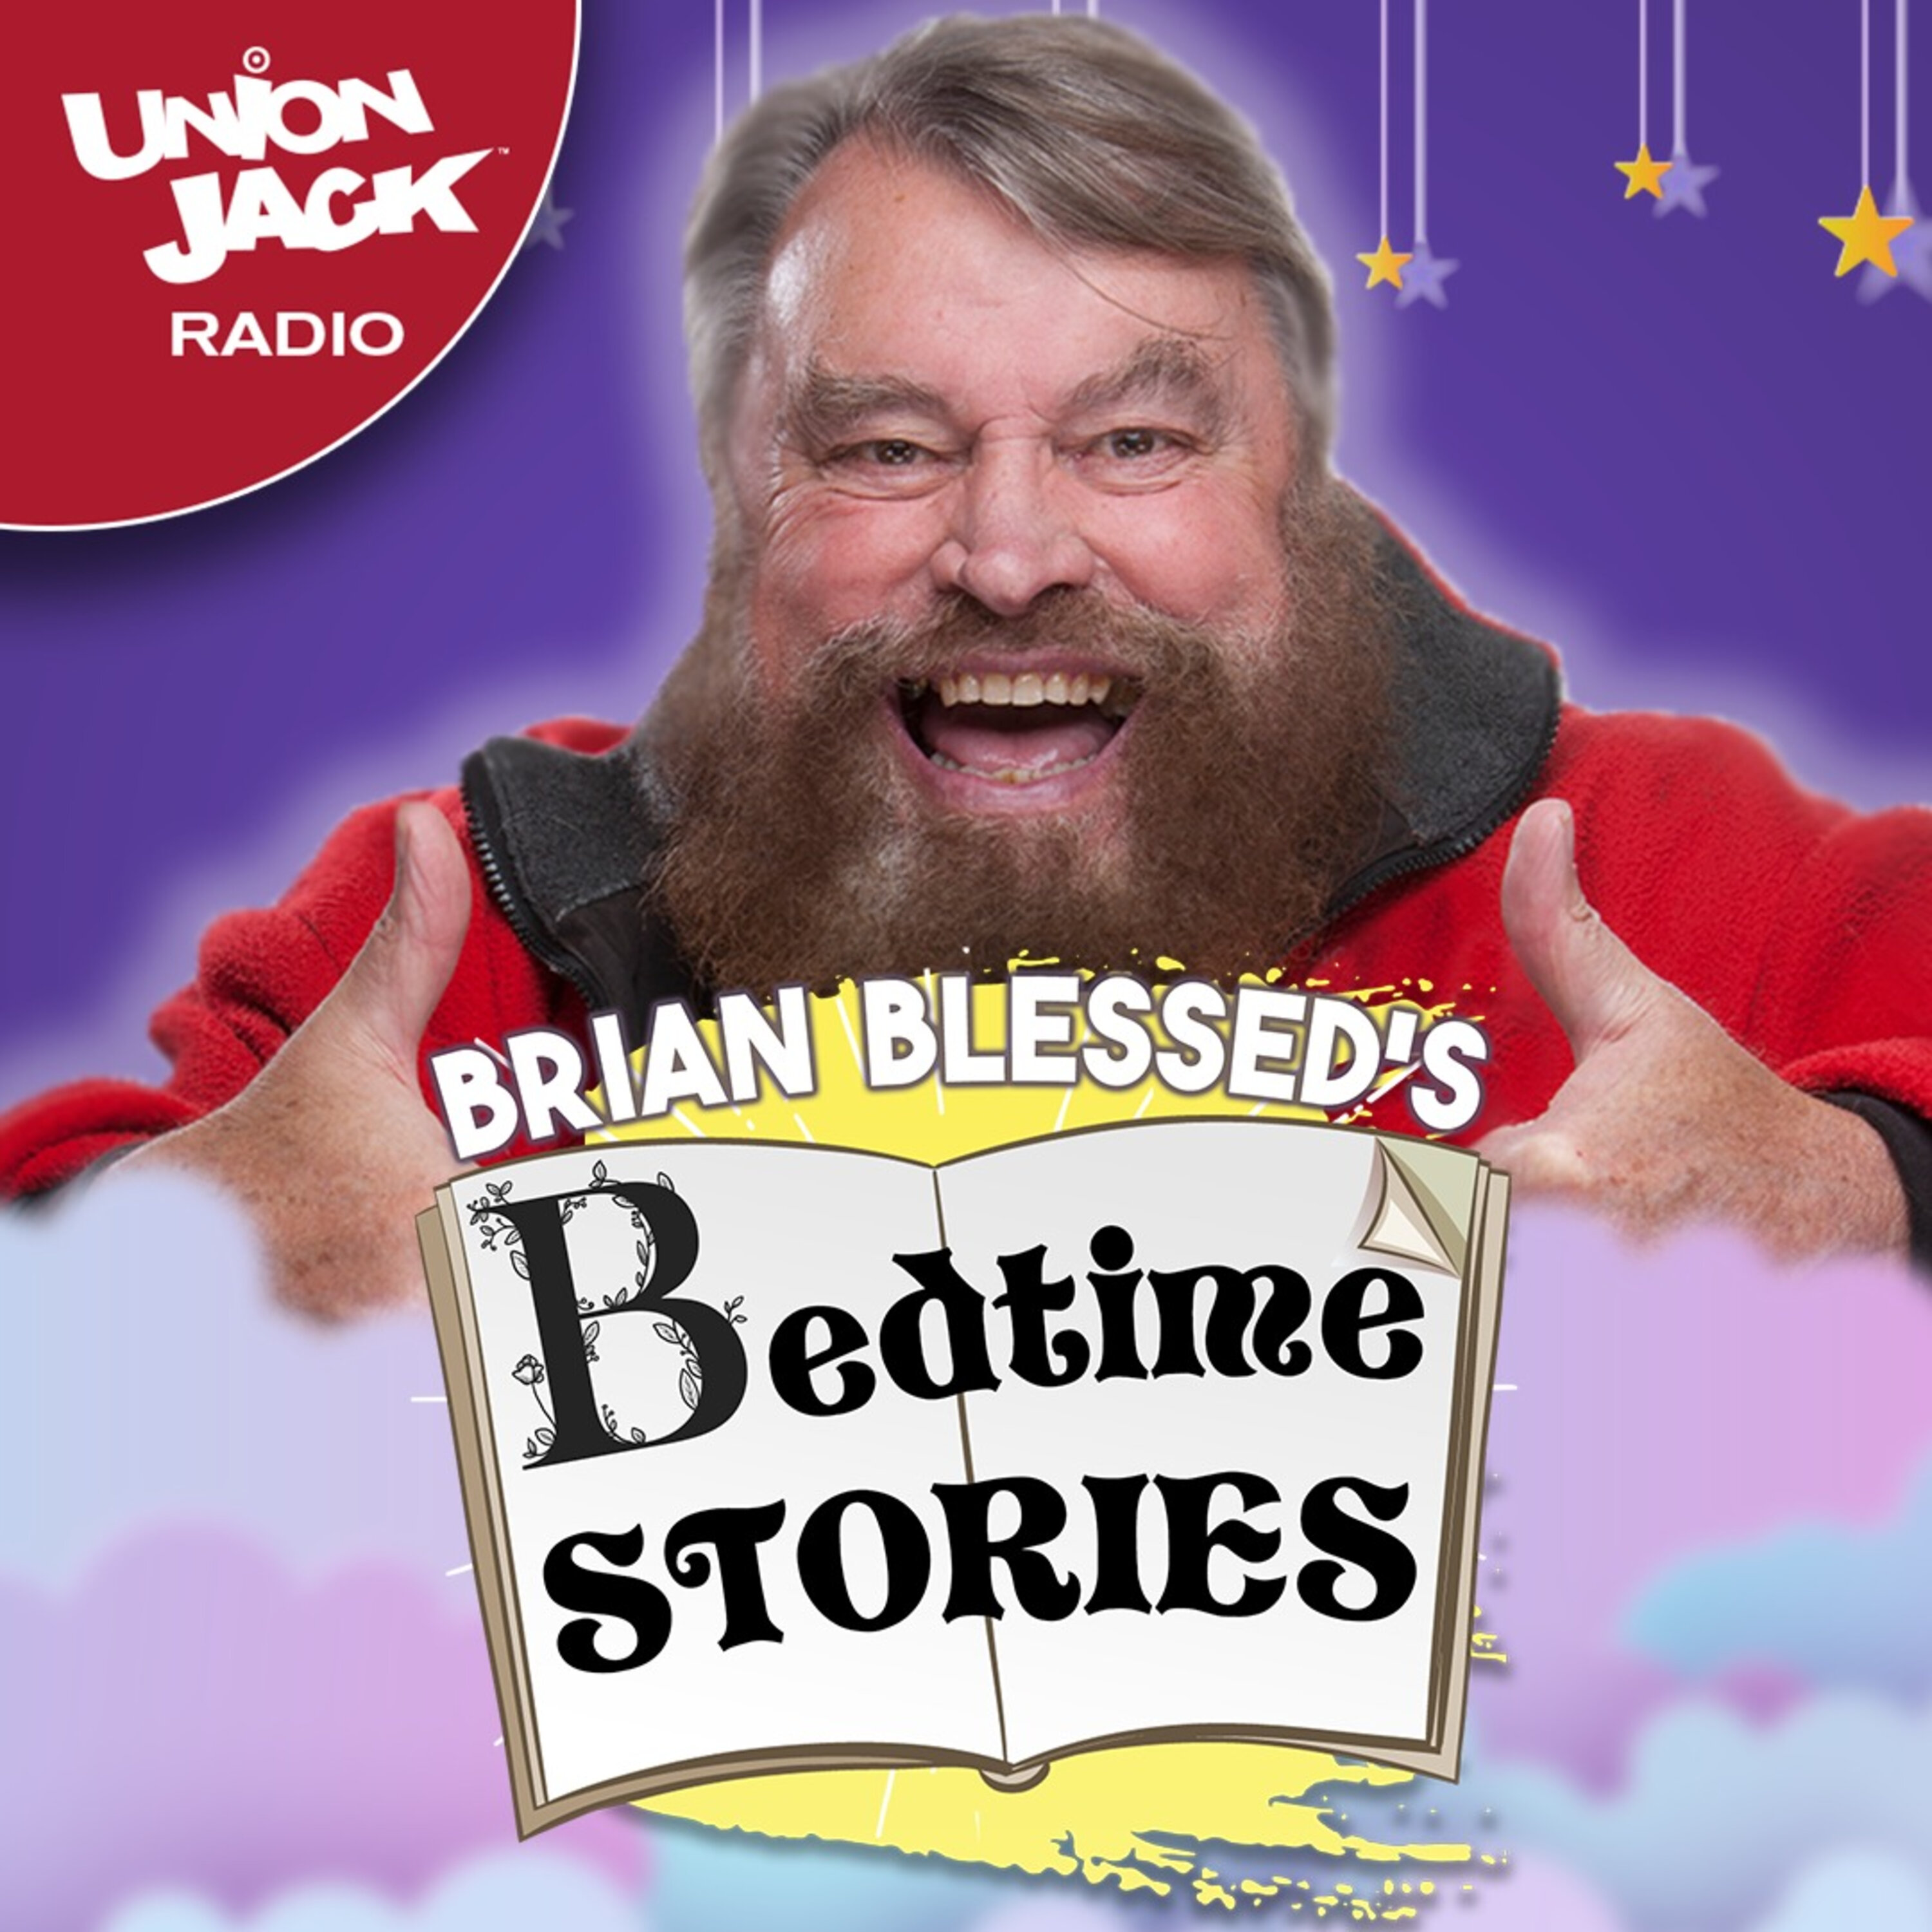 Brian Blessed’s Bedtime Stories - starts Wed 9th Sept!